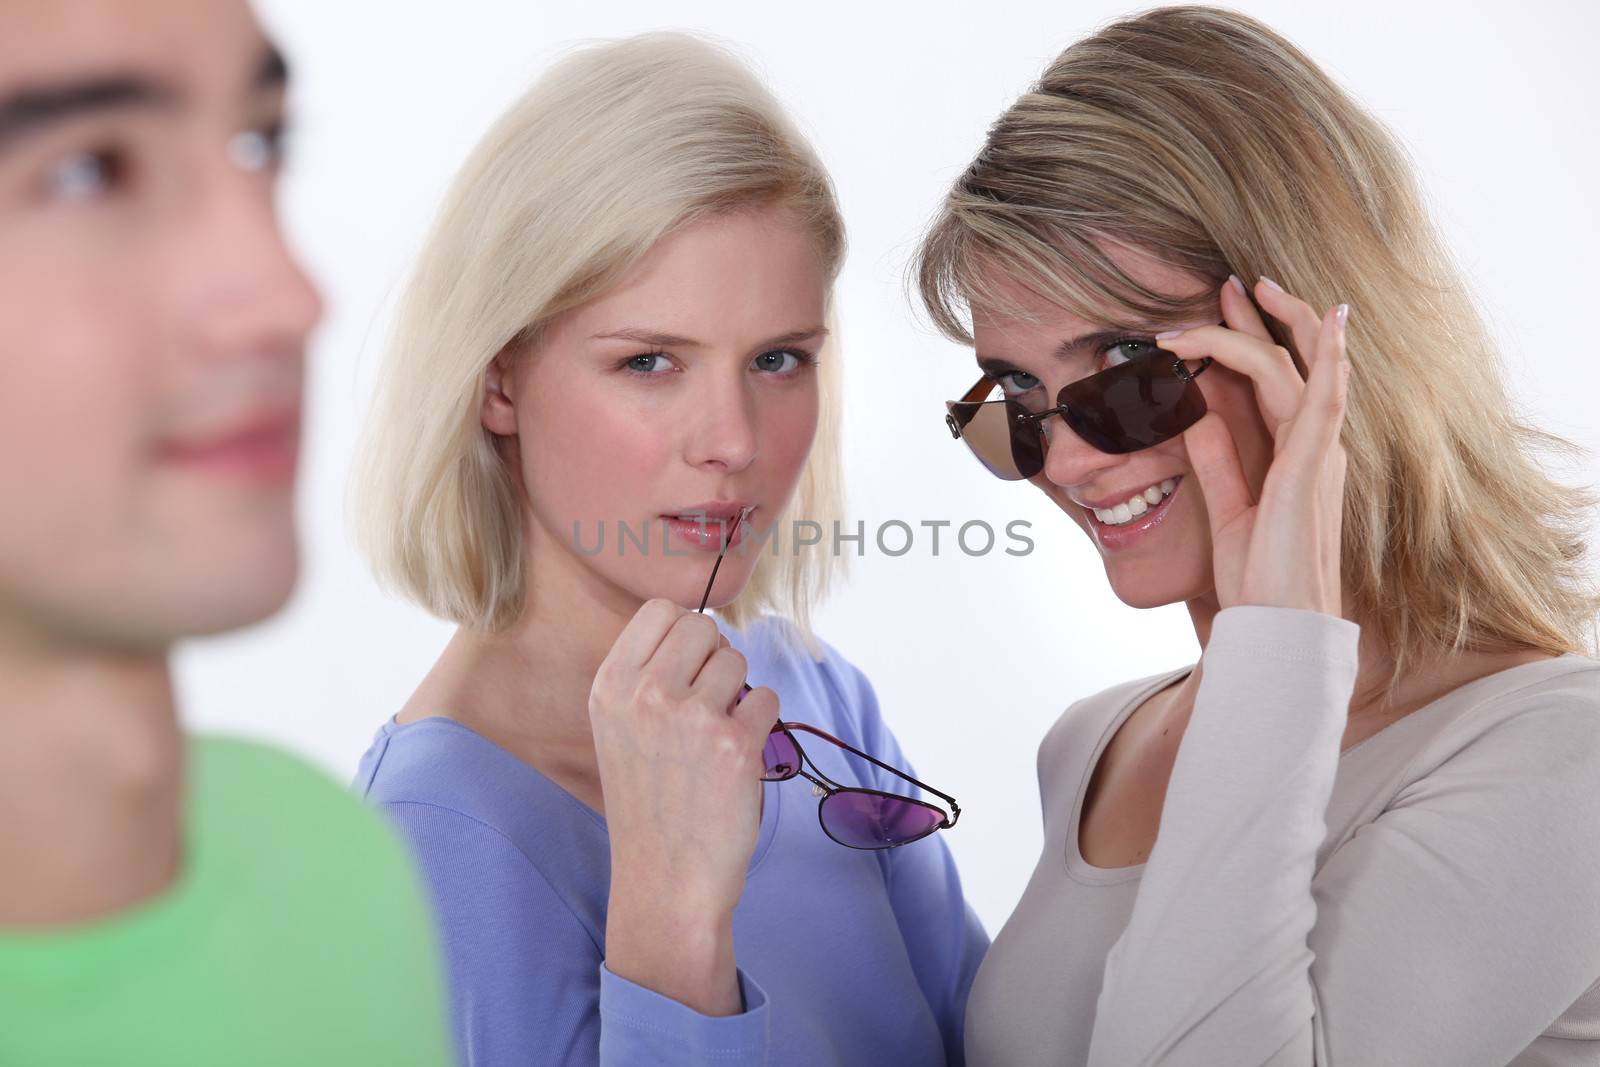 Women staring at the object of their desire by phovoir